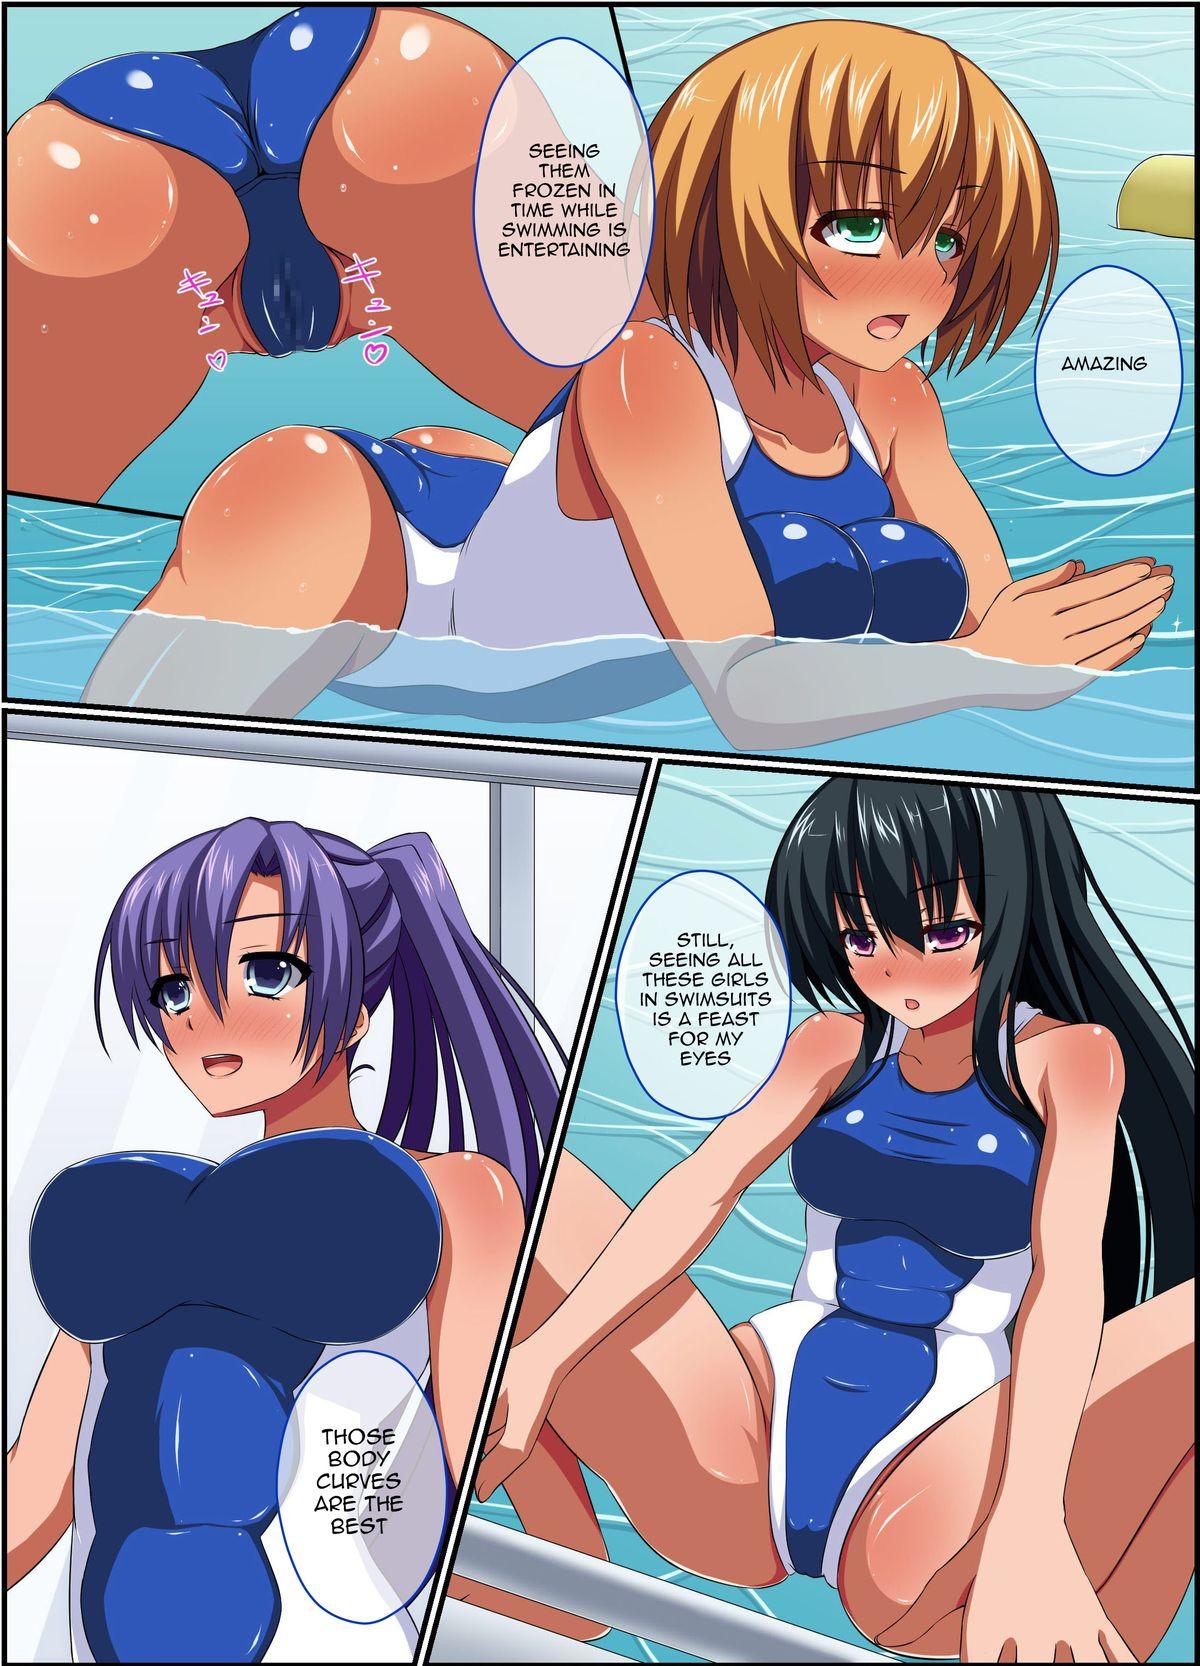 Belly Ase de Muremure no Joshi o Jikan o Tomete Okasu ~ Sports Gym Hen | Stopping Time to Violate Women While Horny With Sweat - Sports Gym Edition Anal Sex - Page 8